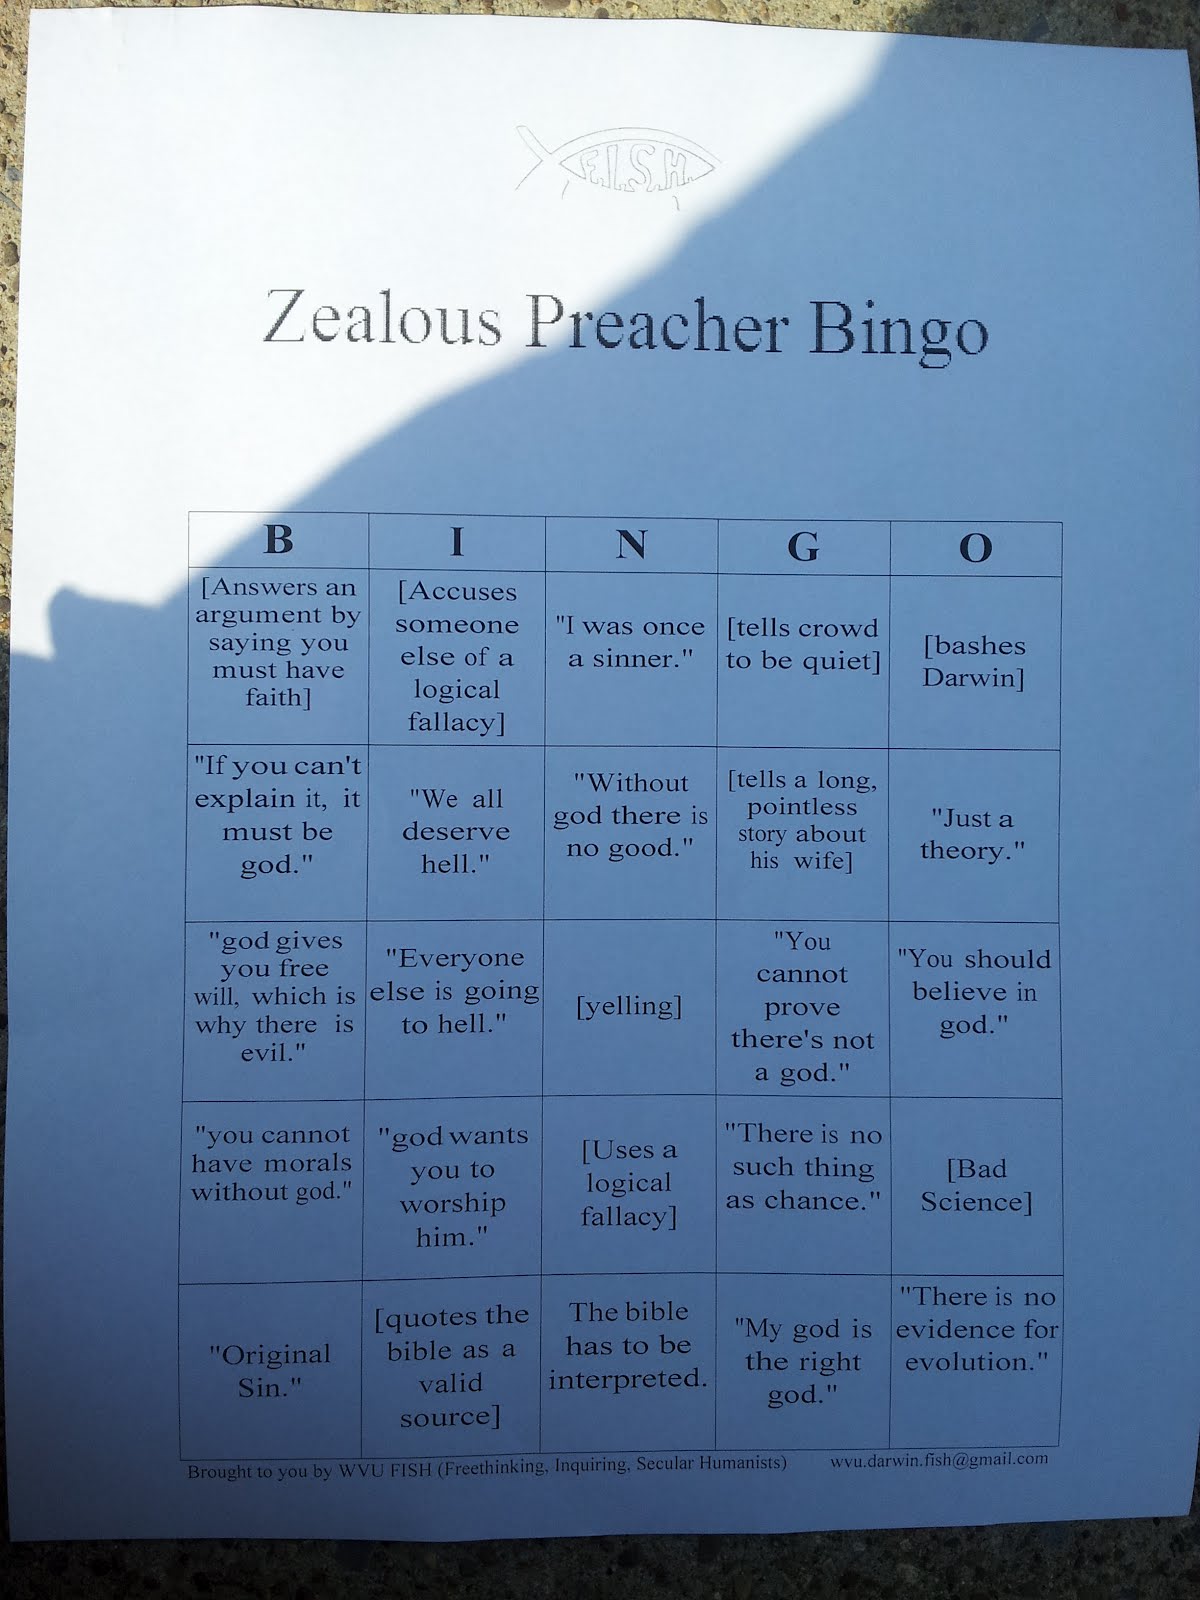 modern preacher bingo - Zealous Preacher Bingo G O Answers an argument by saying you must have faith bashes Darwin Accuses someone "I was once tells crowd else of a a sinner." to be quiet logical fallacy "Without tells a long, "We all deserve story about 